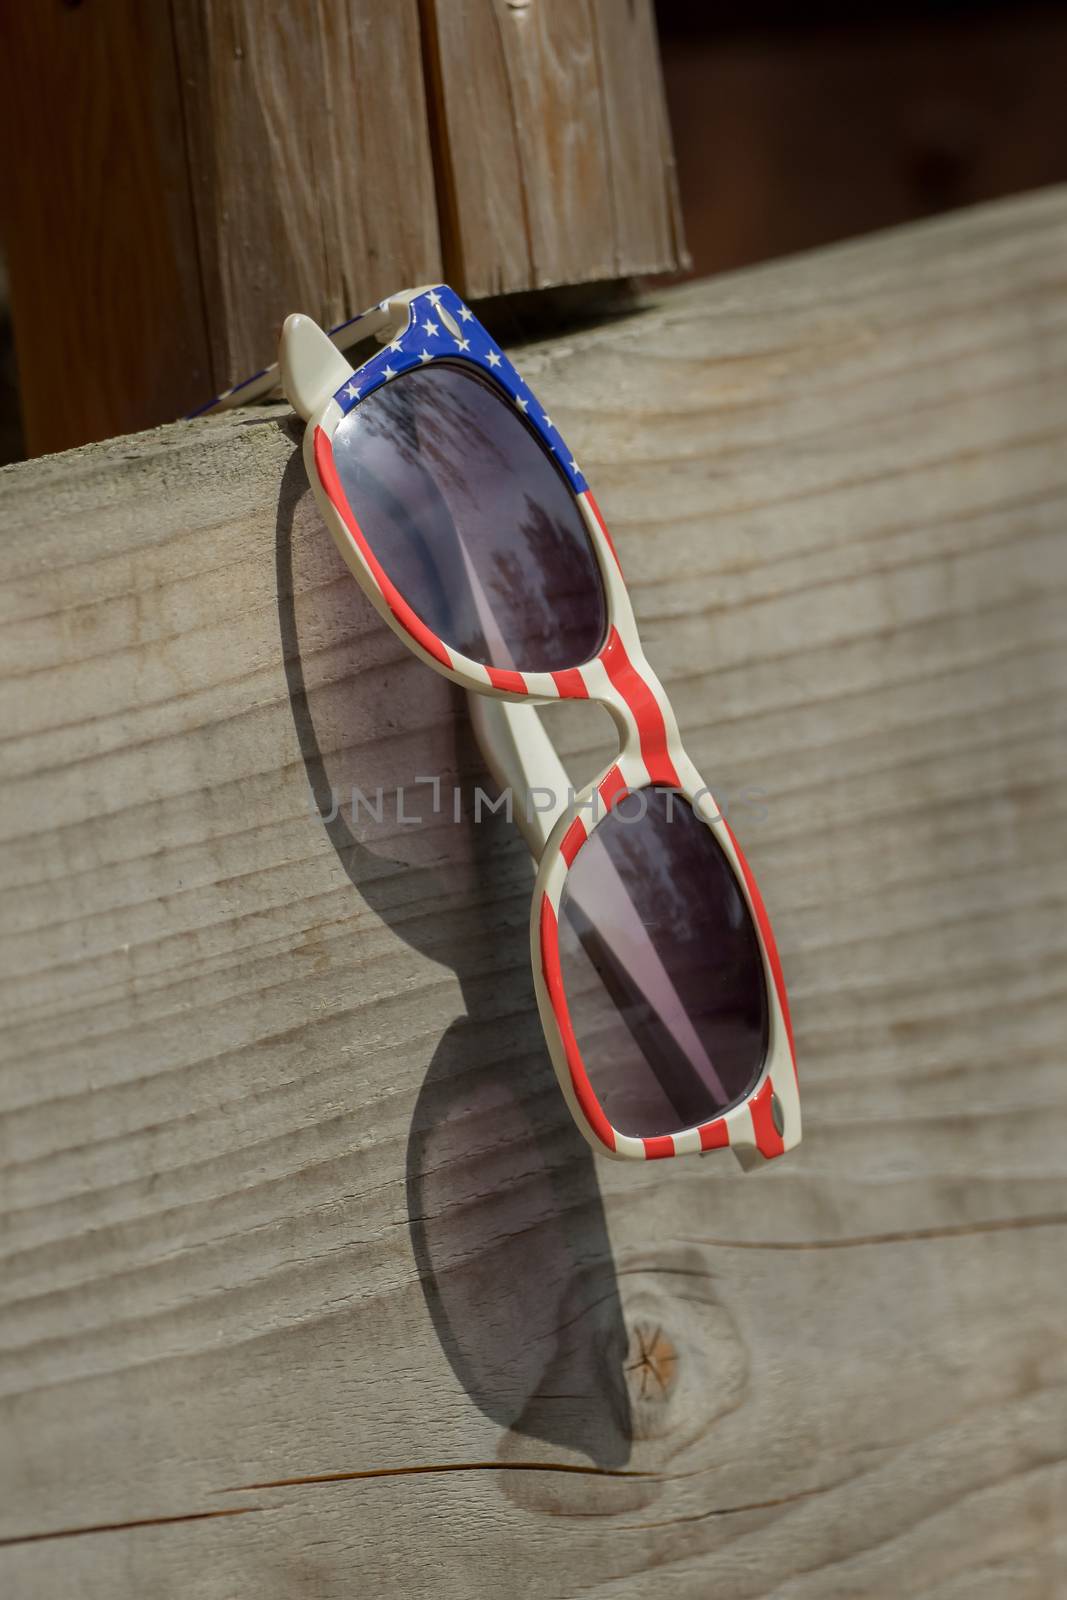 A sunglasses with American colors